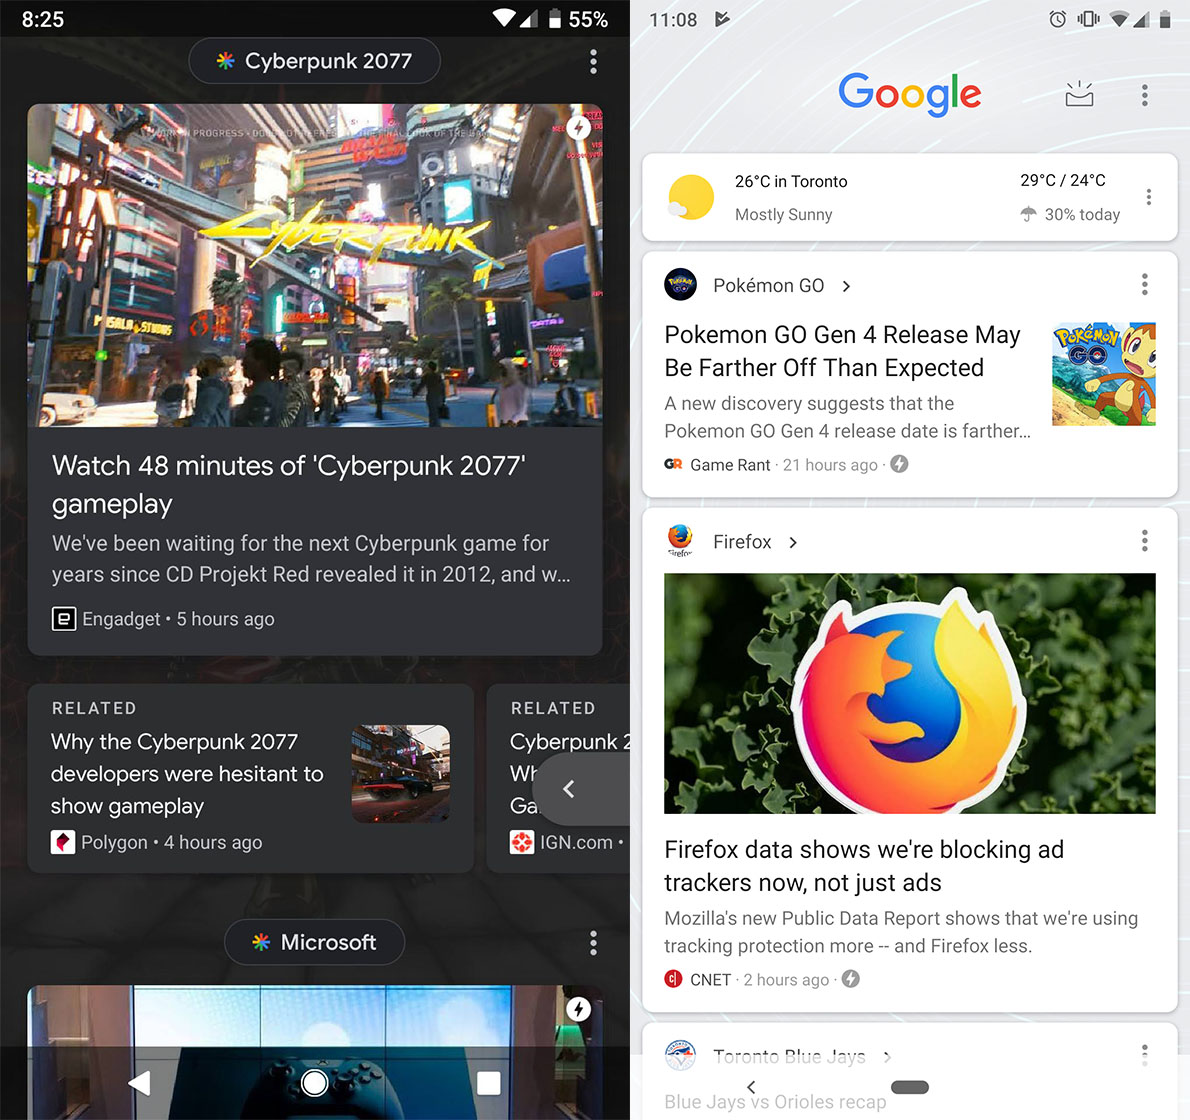 Google Feed new look (left) vs. old (right)